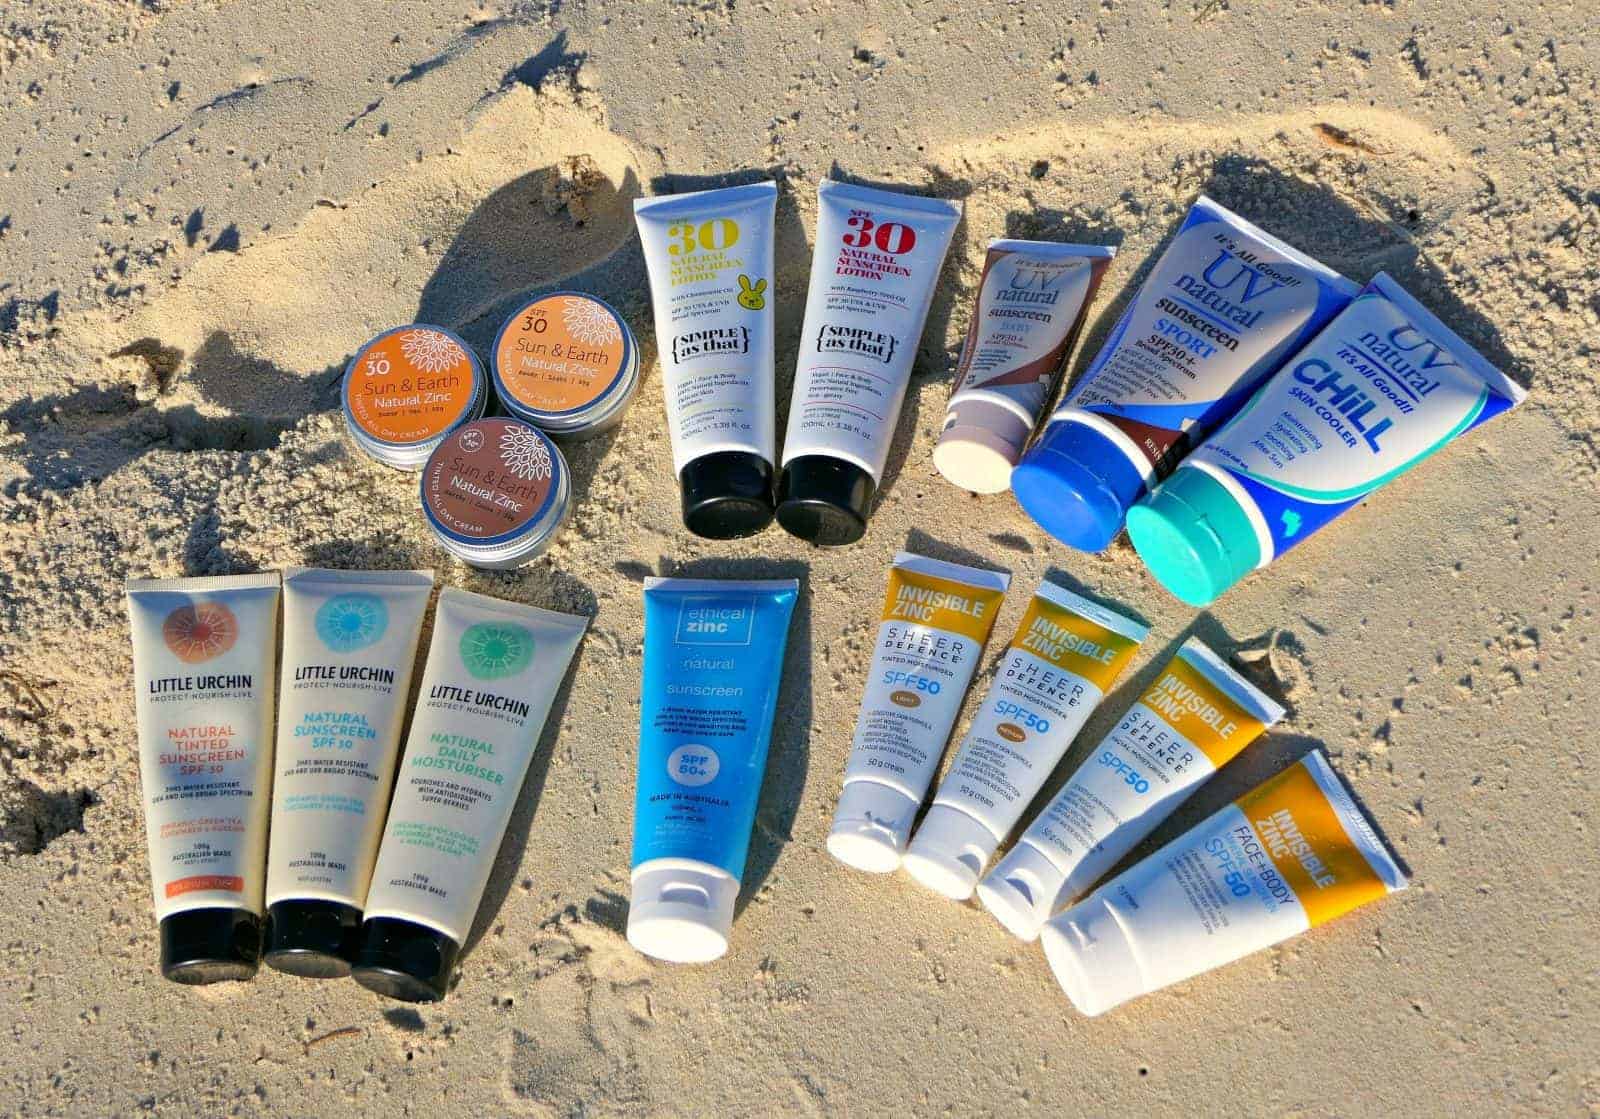 A collection of the best zinc sunscreens in Australia on the sand